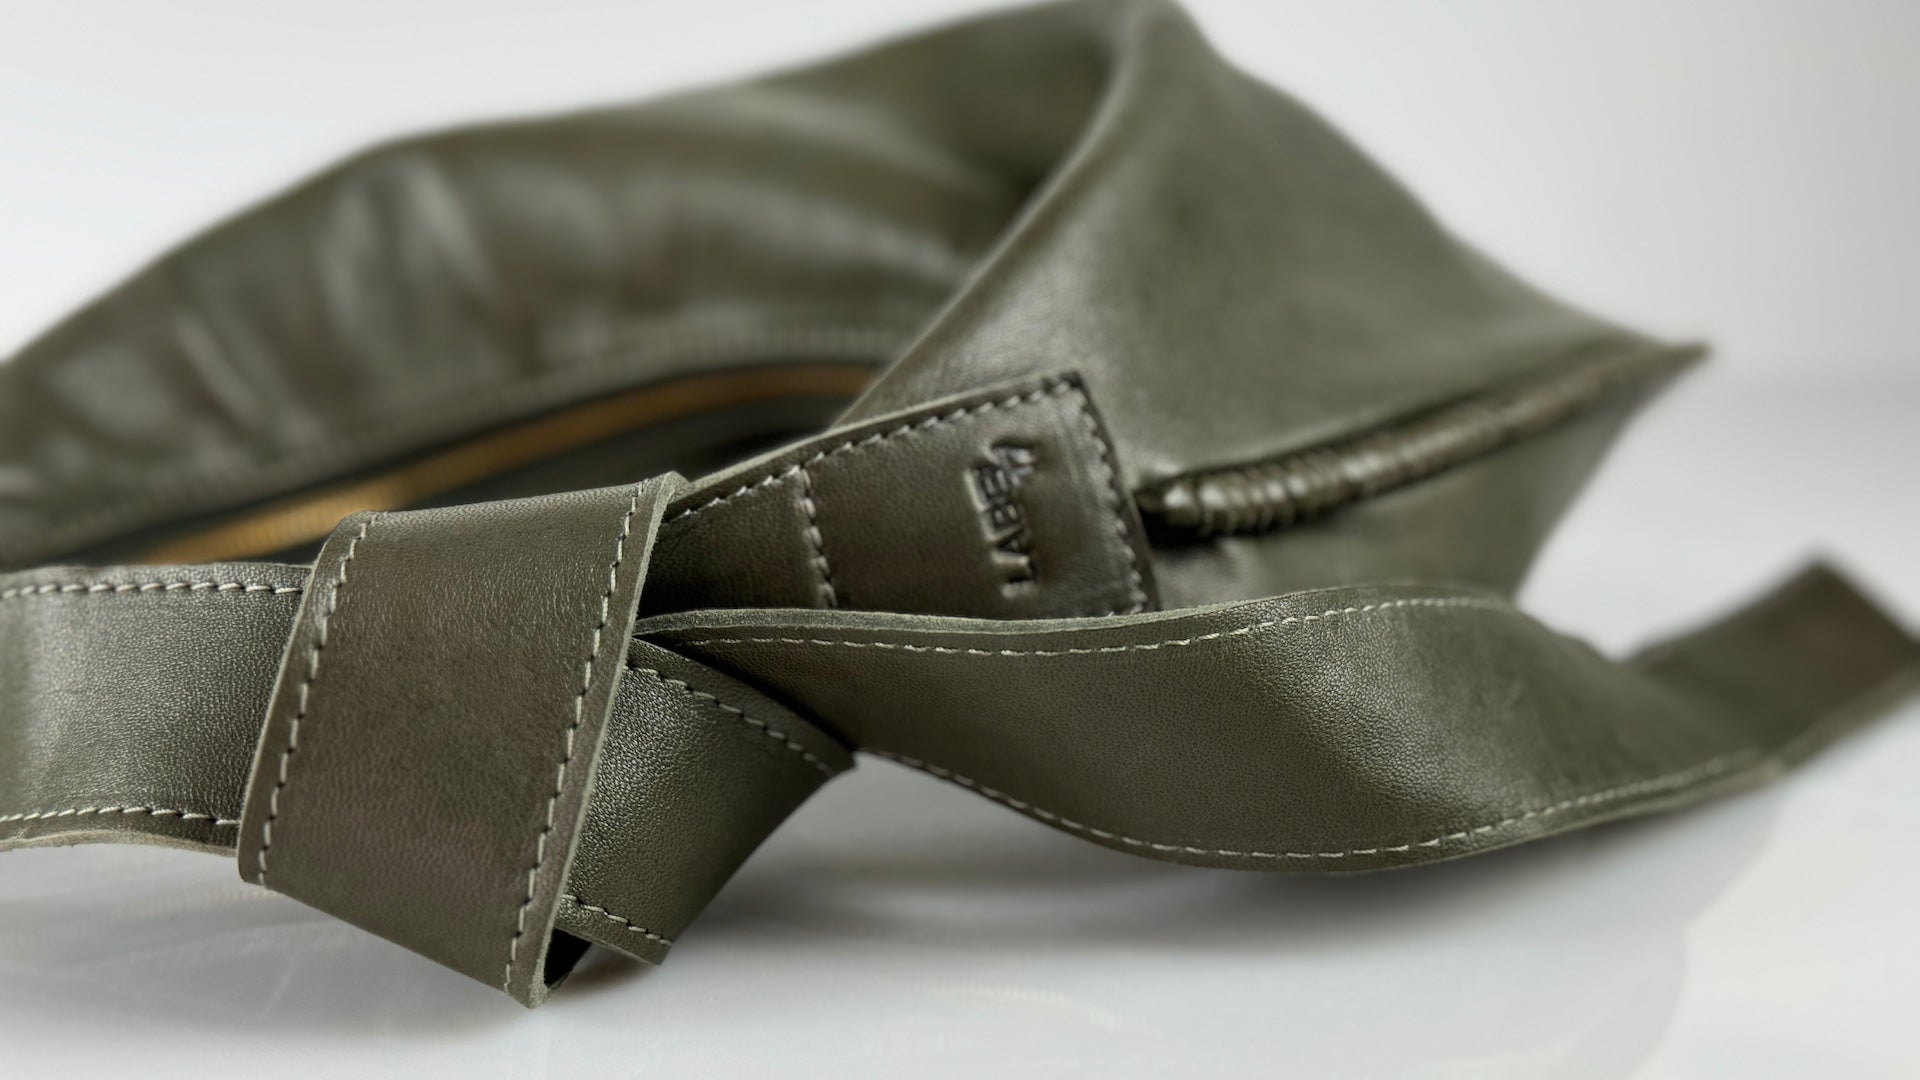 The Shoulder Bag Saddle Ivy in Olive by LABEL17 is crafted from the most supple Nappa leather